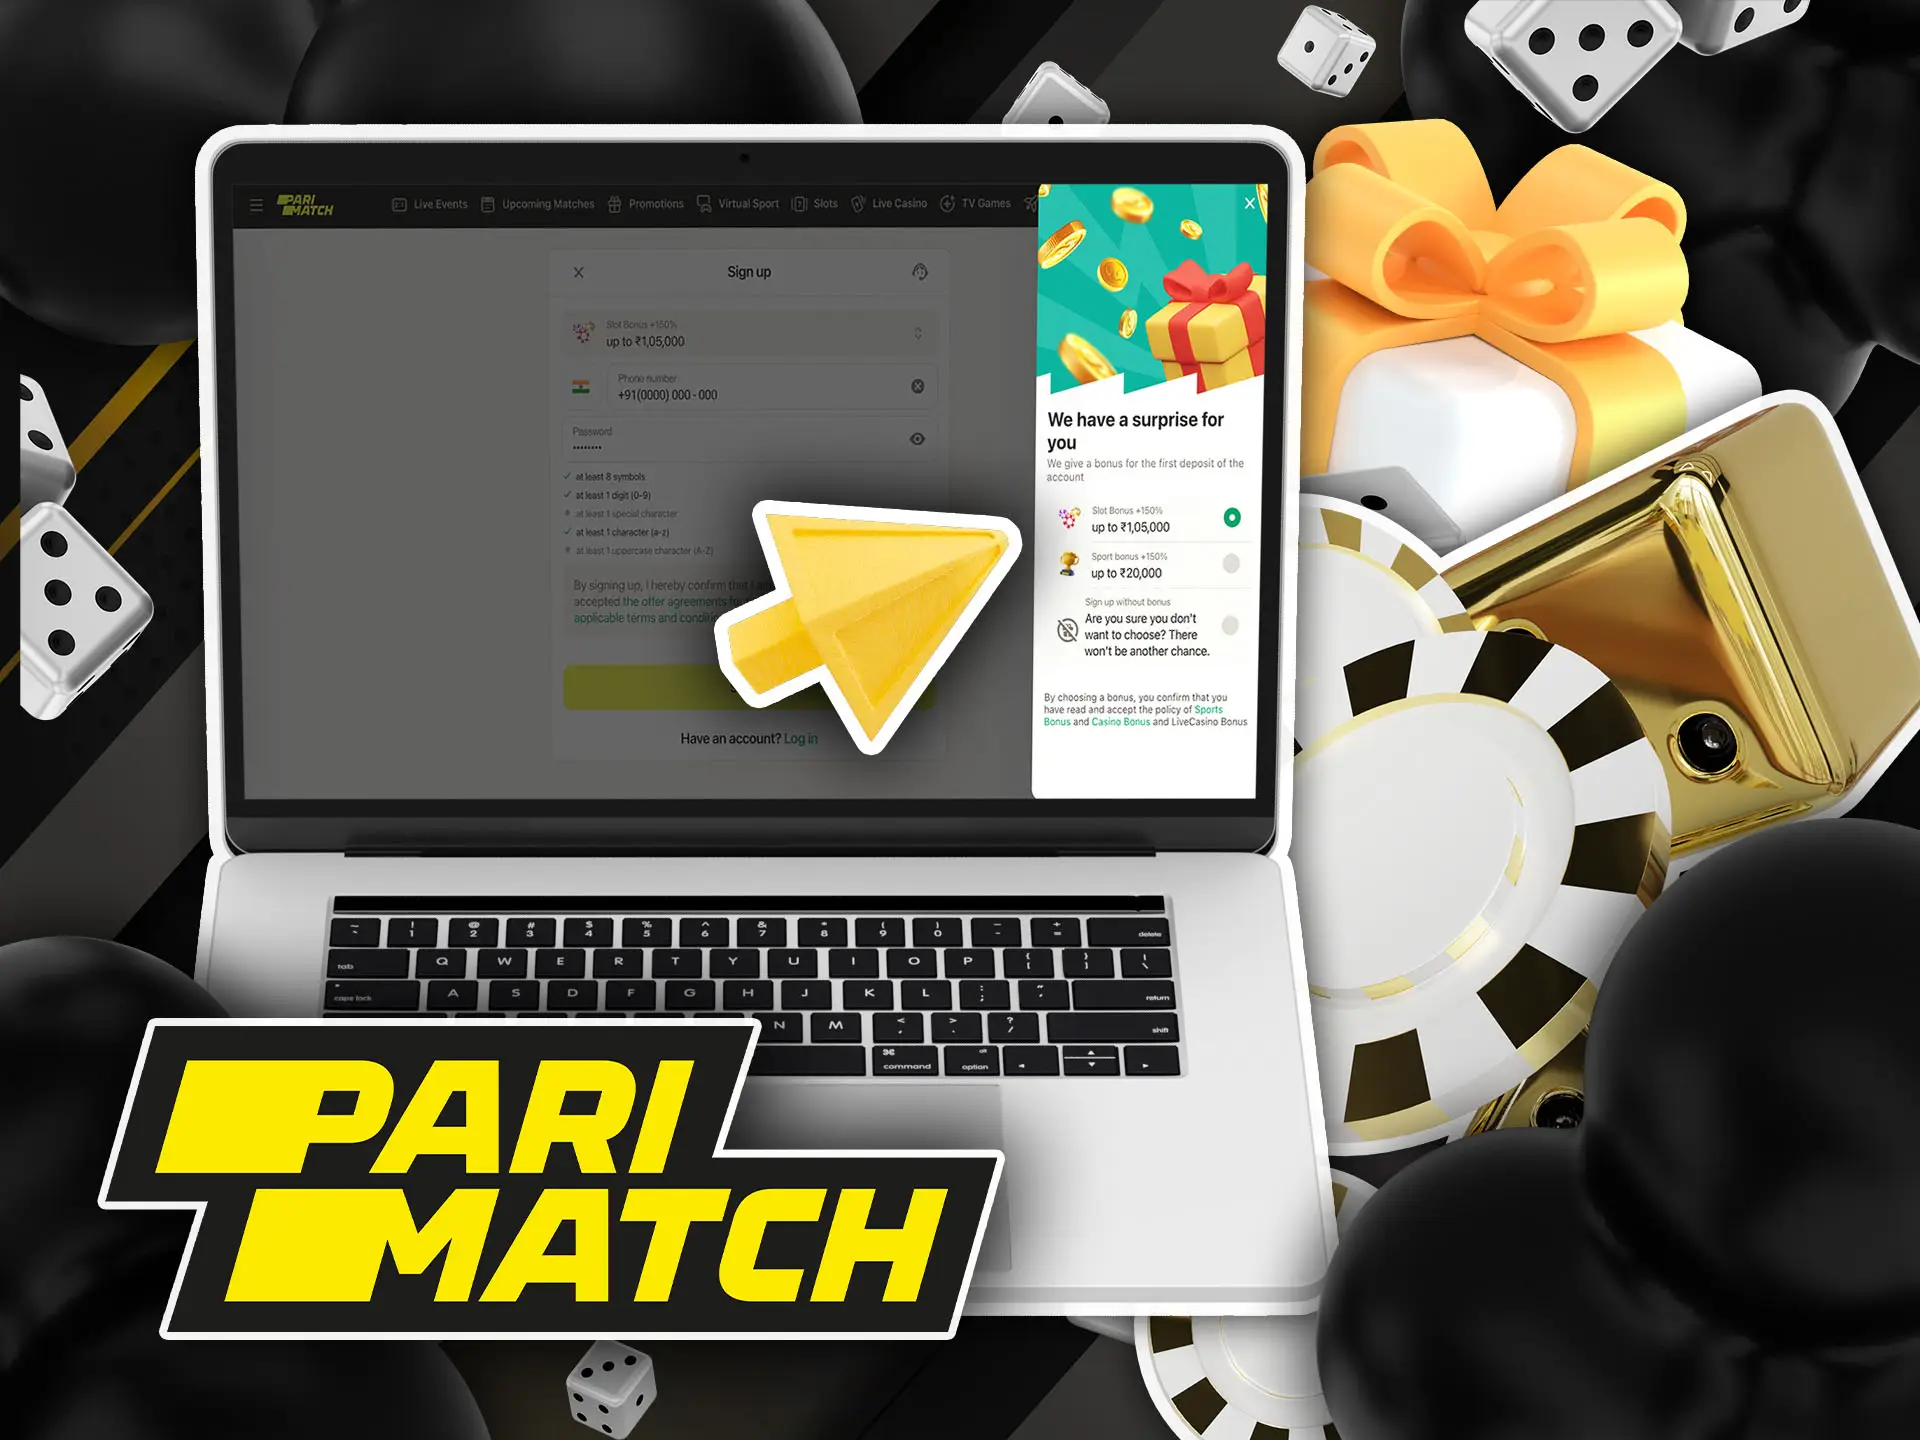 Welcome bonus for parimatch slots in india.